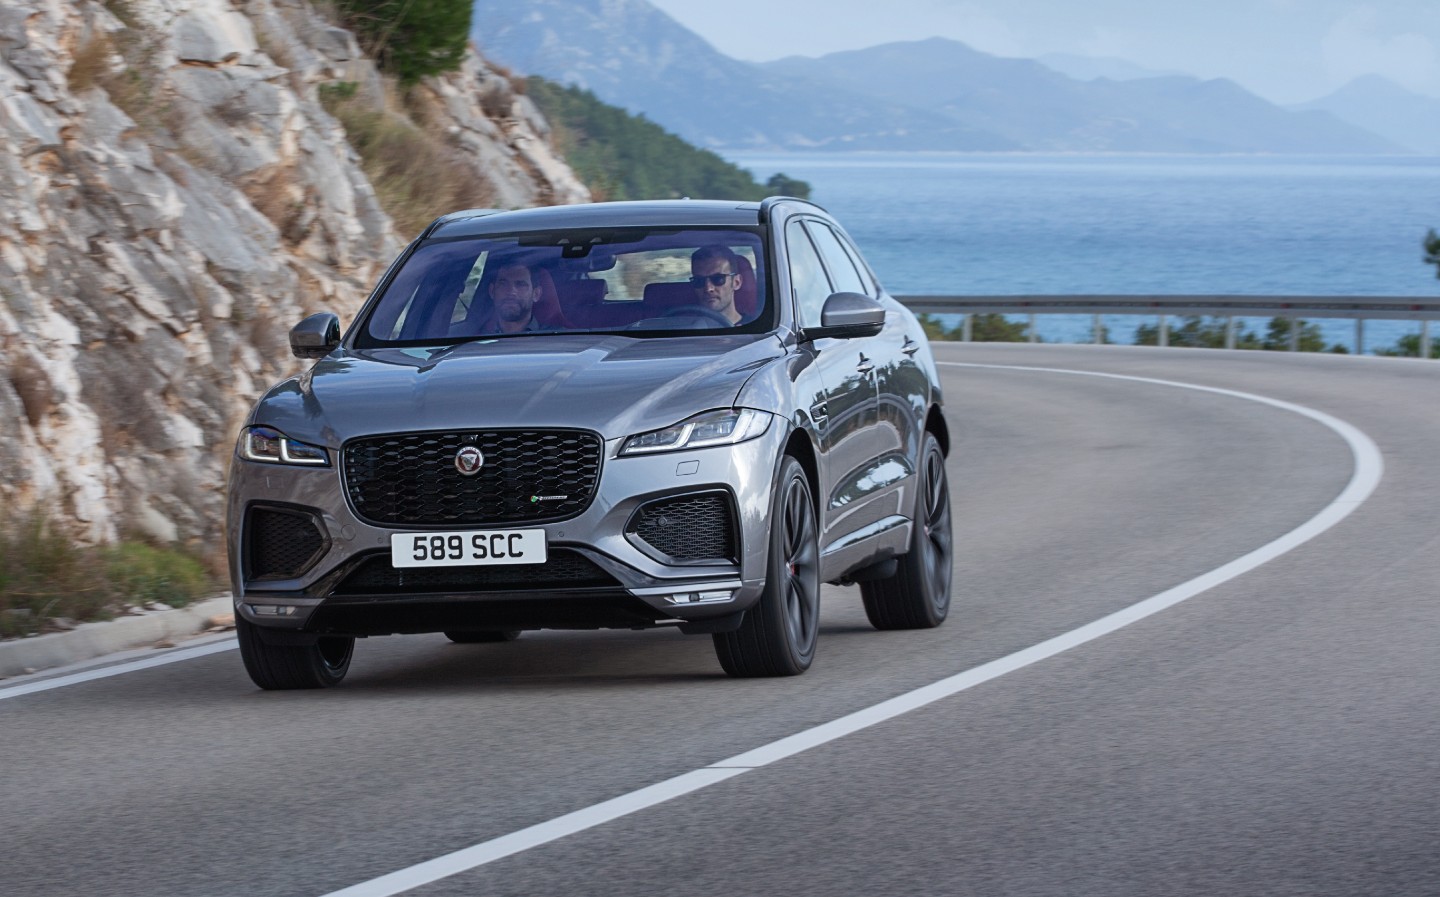 New Jaguar F-Pace 2021 review by Will Dron for Sunday Times Driving.co.uk